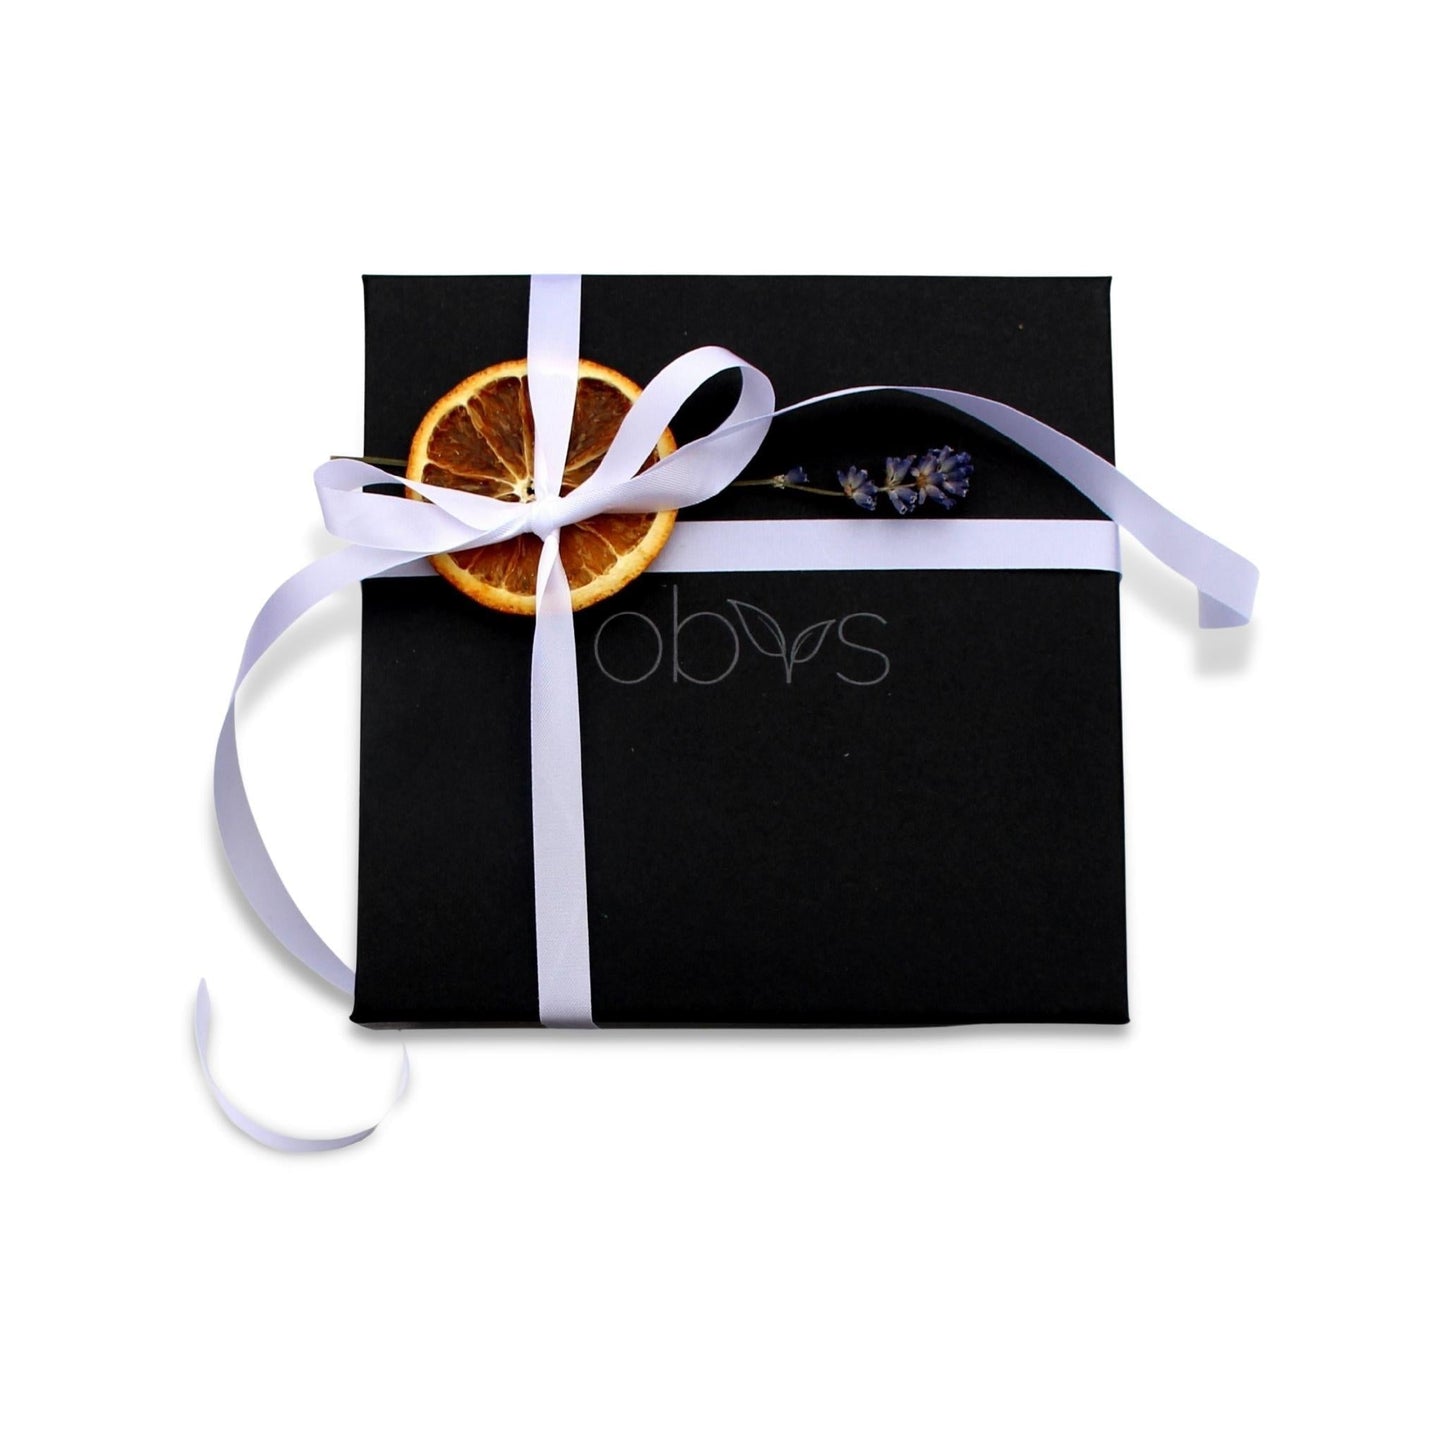 Obvs Skincare Gift Set - Wellbeing Collection - Obvs Skincare - acne - eczema - skincare - organic